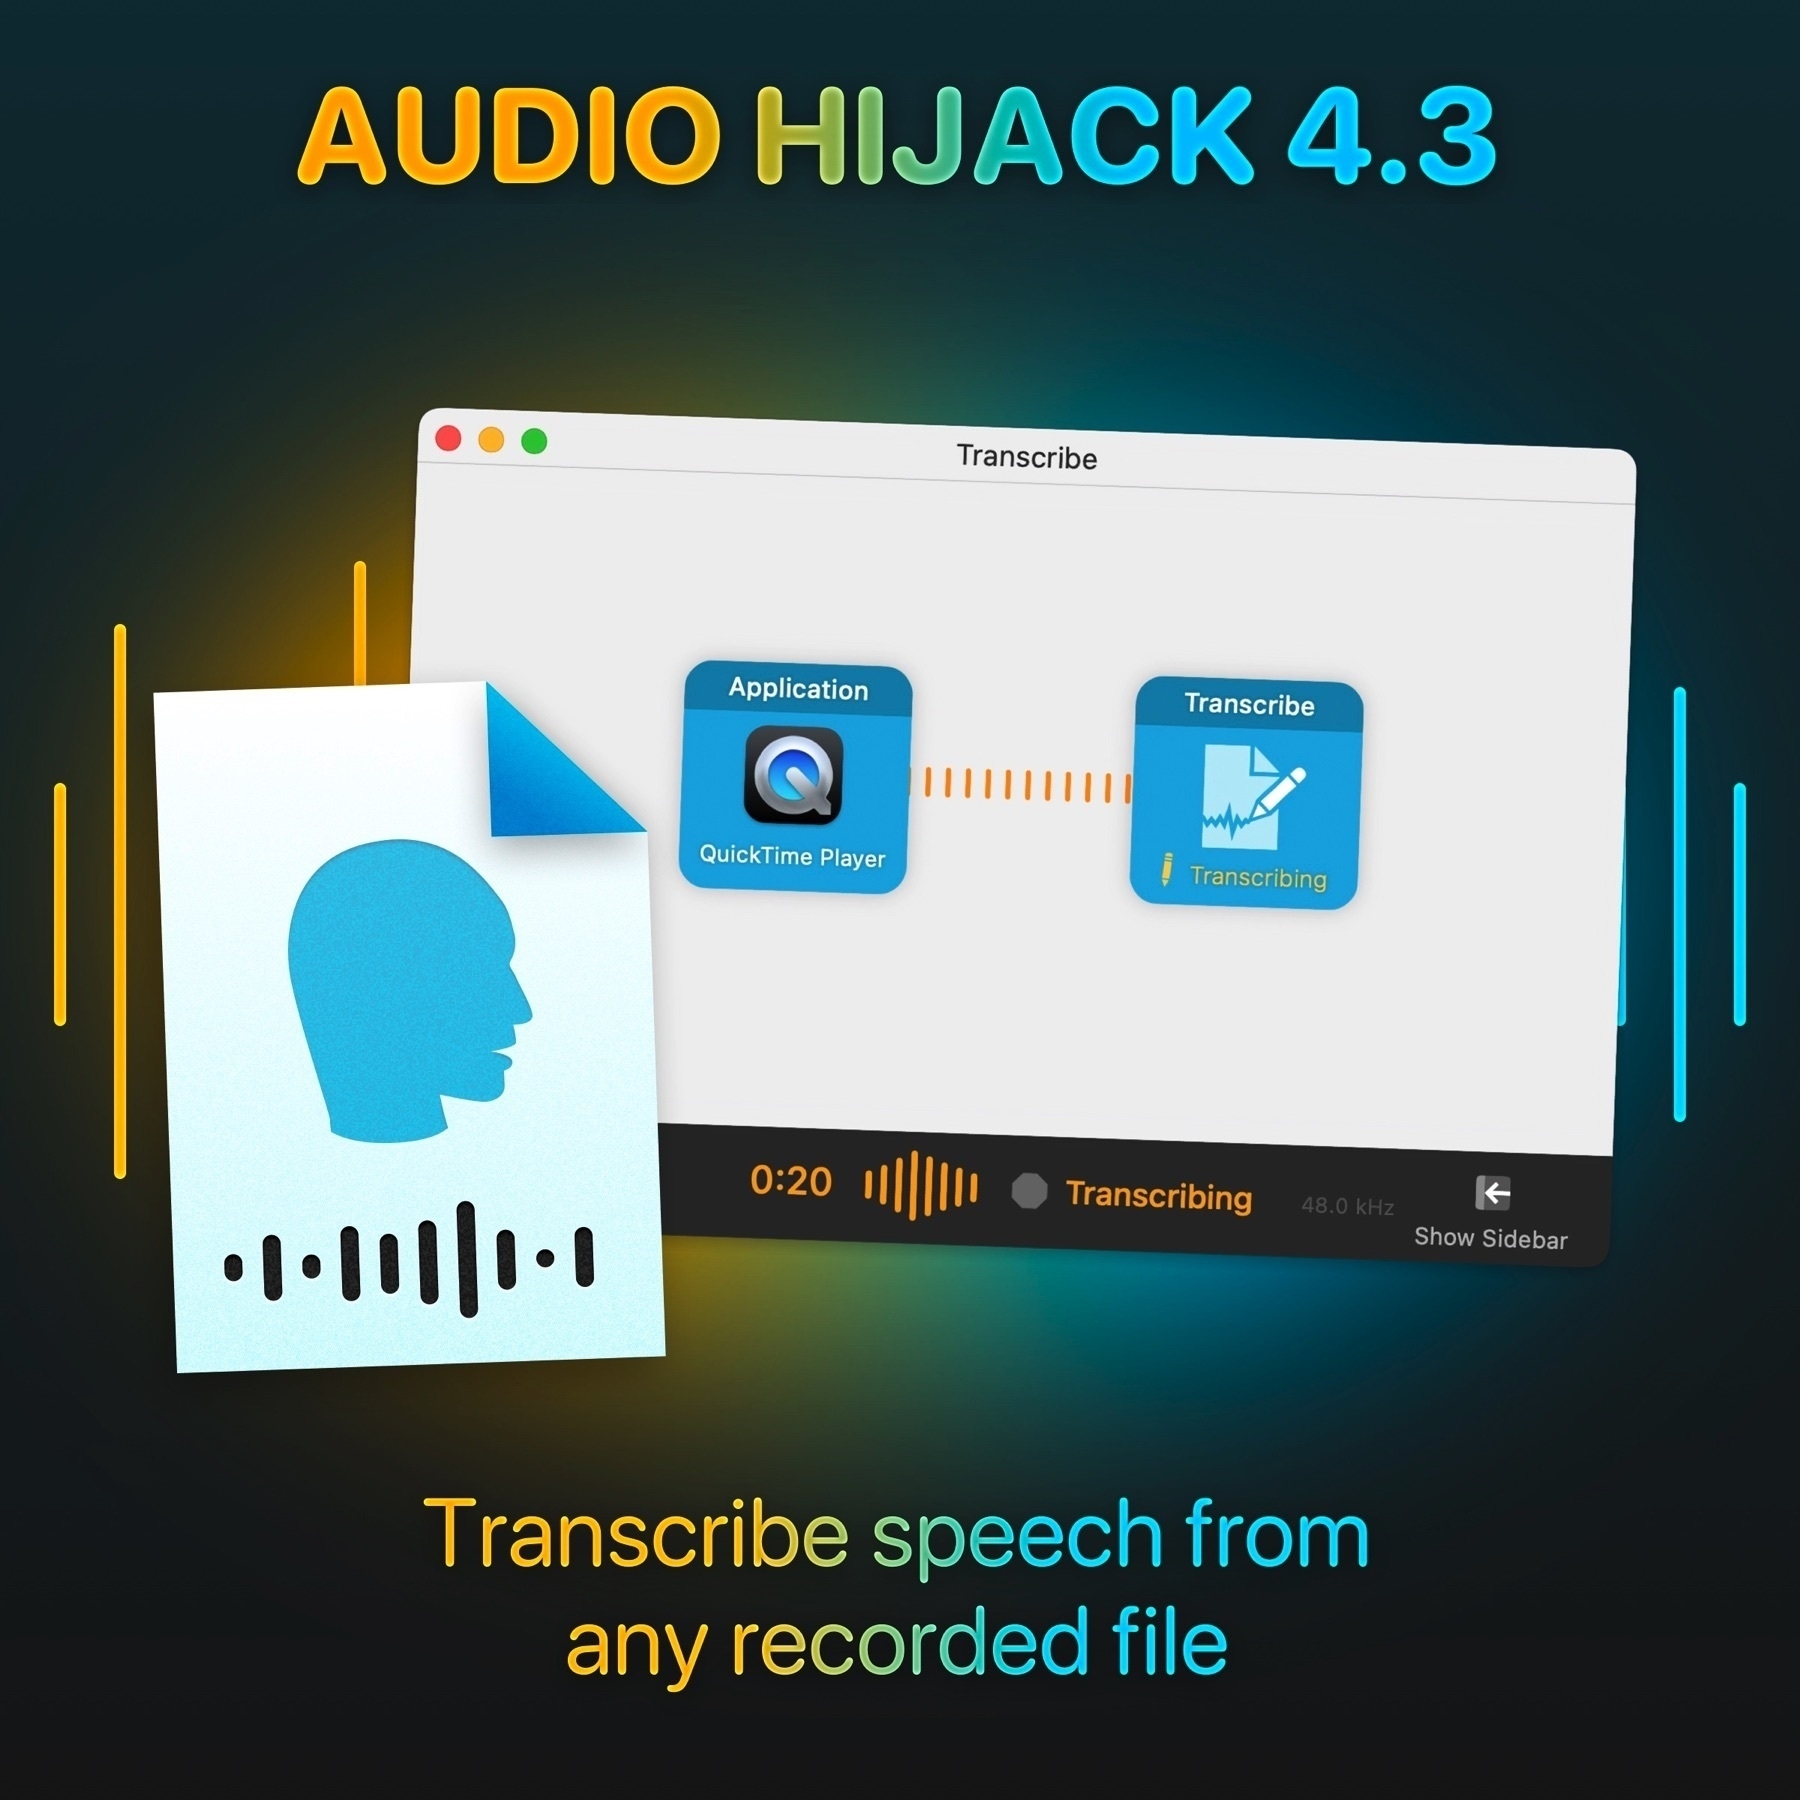 Audio Hijack 4.3 screenshot, with text “Transcribe speech from any recorded file”